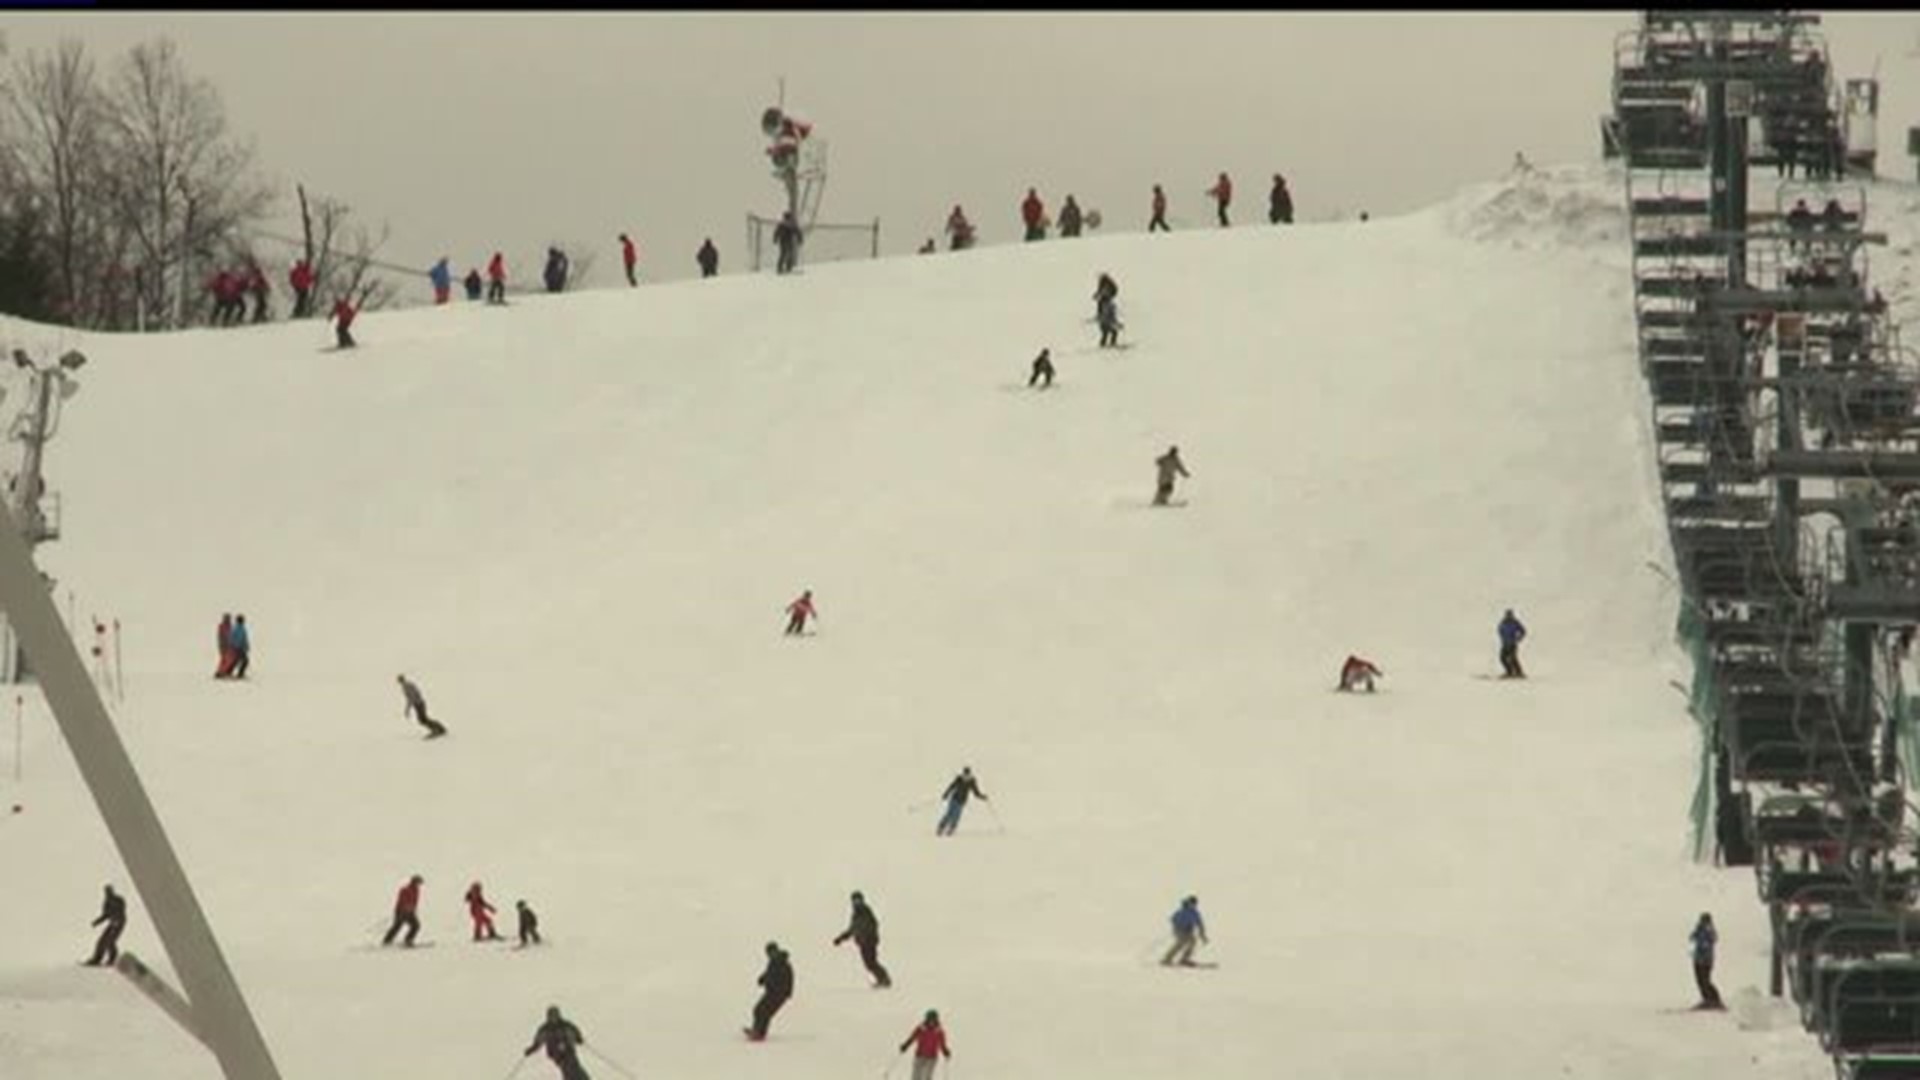 Cold weather has ski slopes opening early